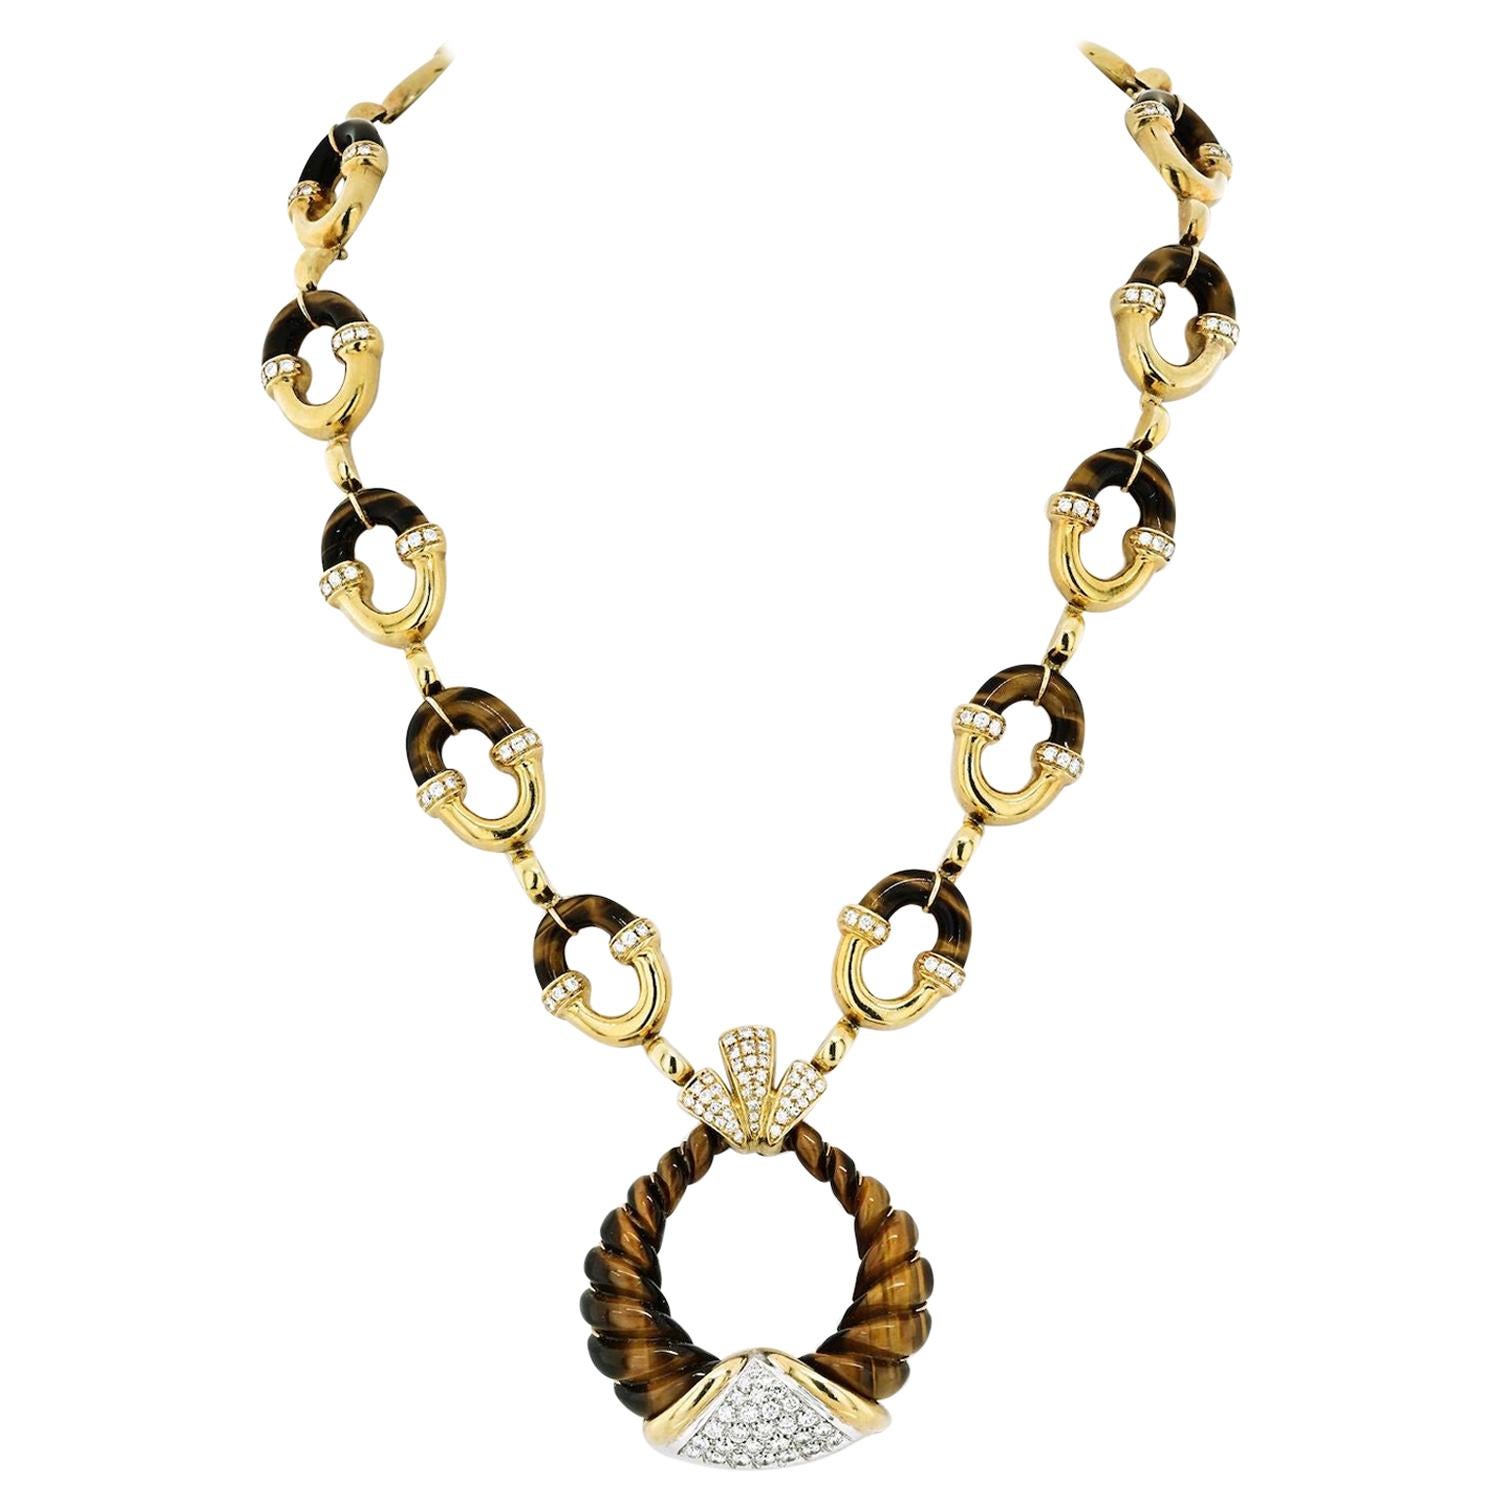 MOBA 18K Yellow Gold Unusual Tribal Style 1970's Tiger Eye Diamond Link Necklace